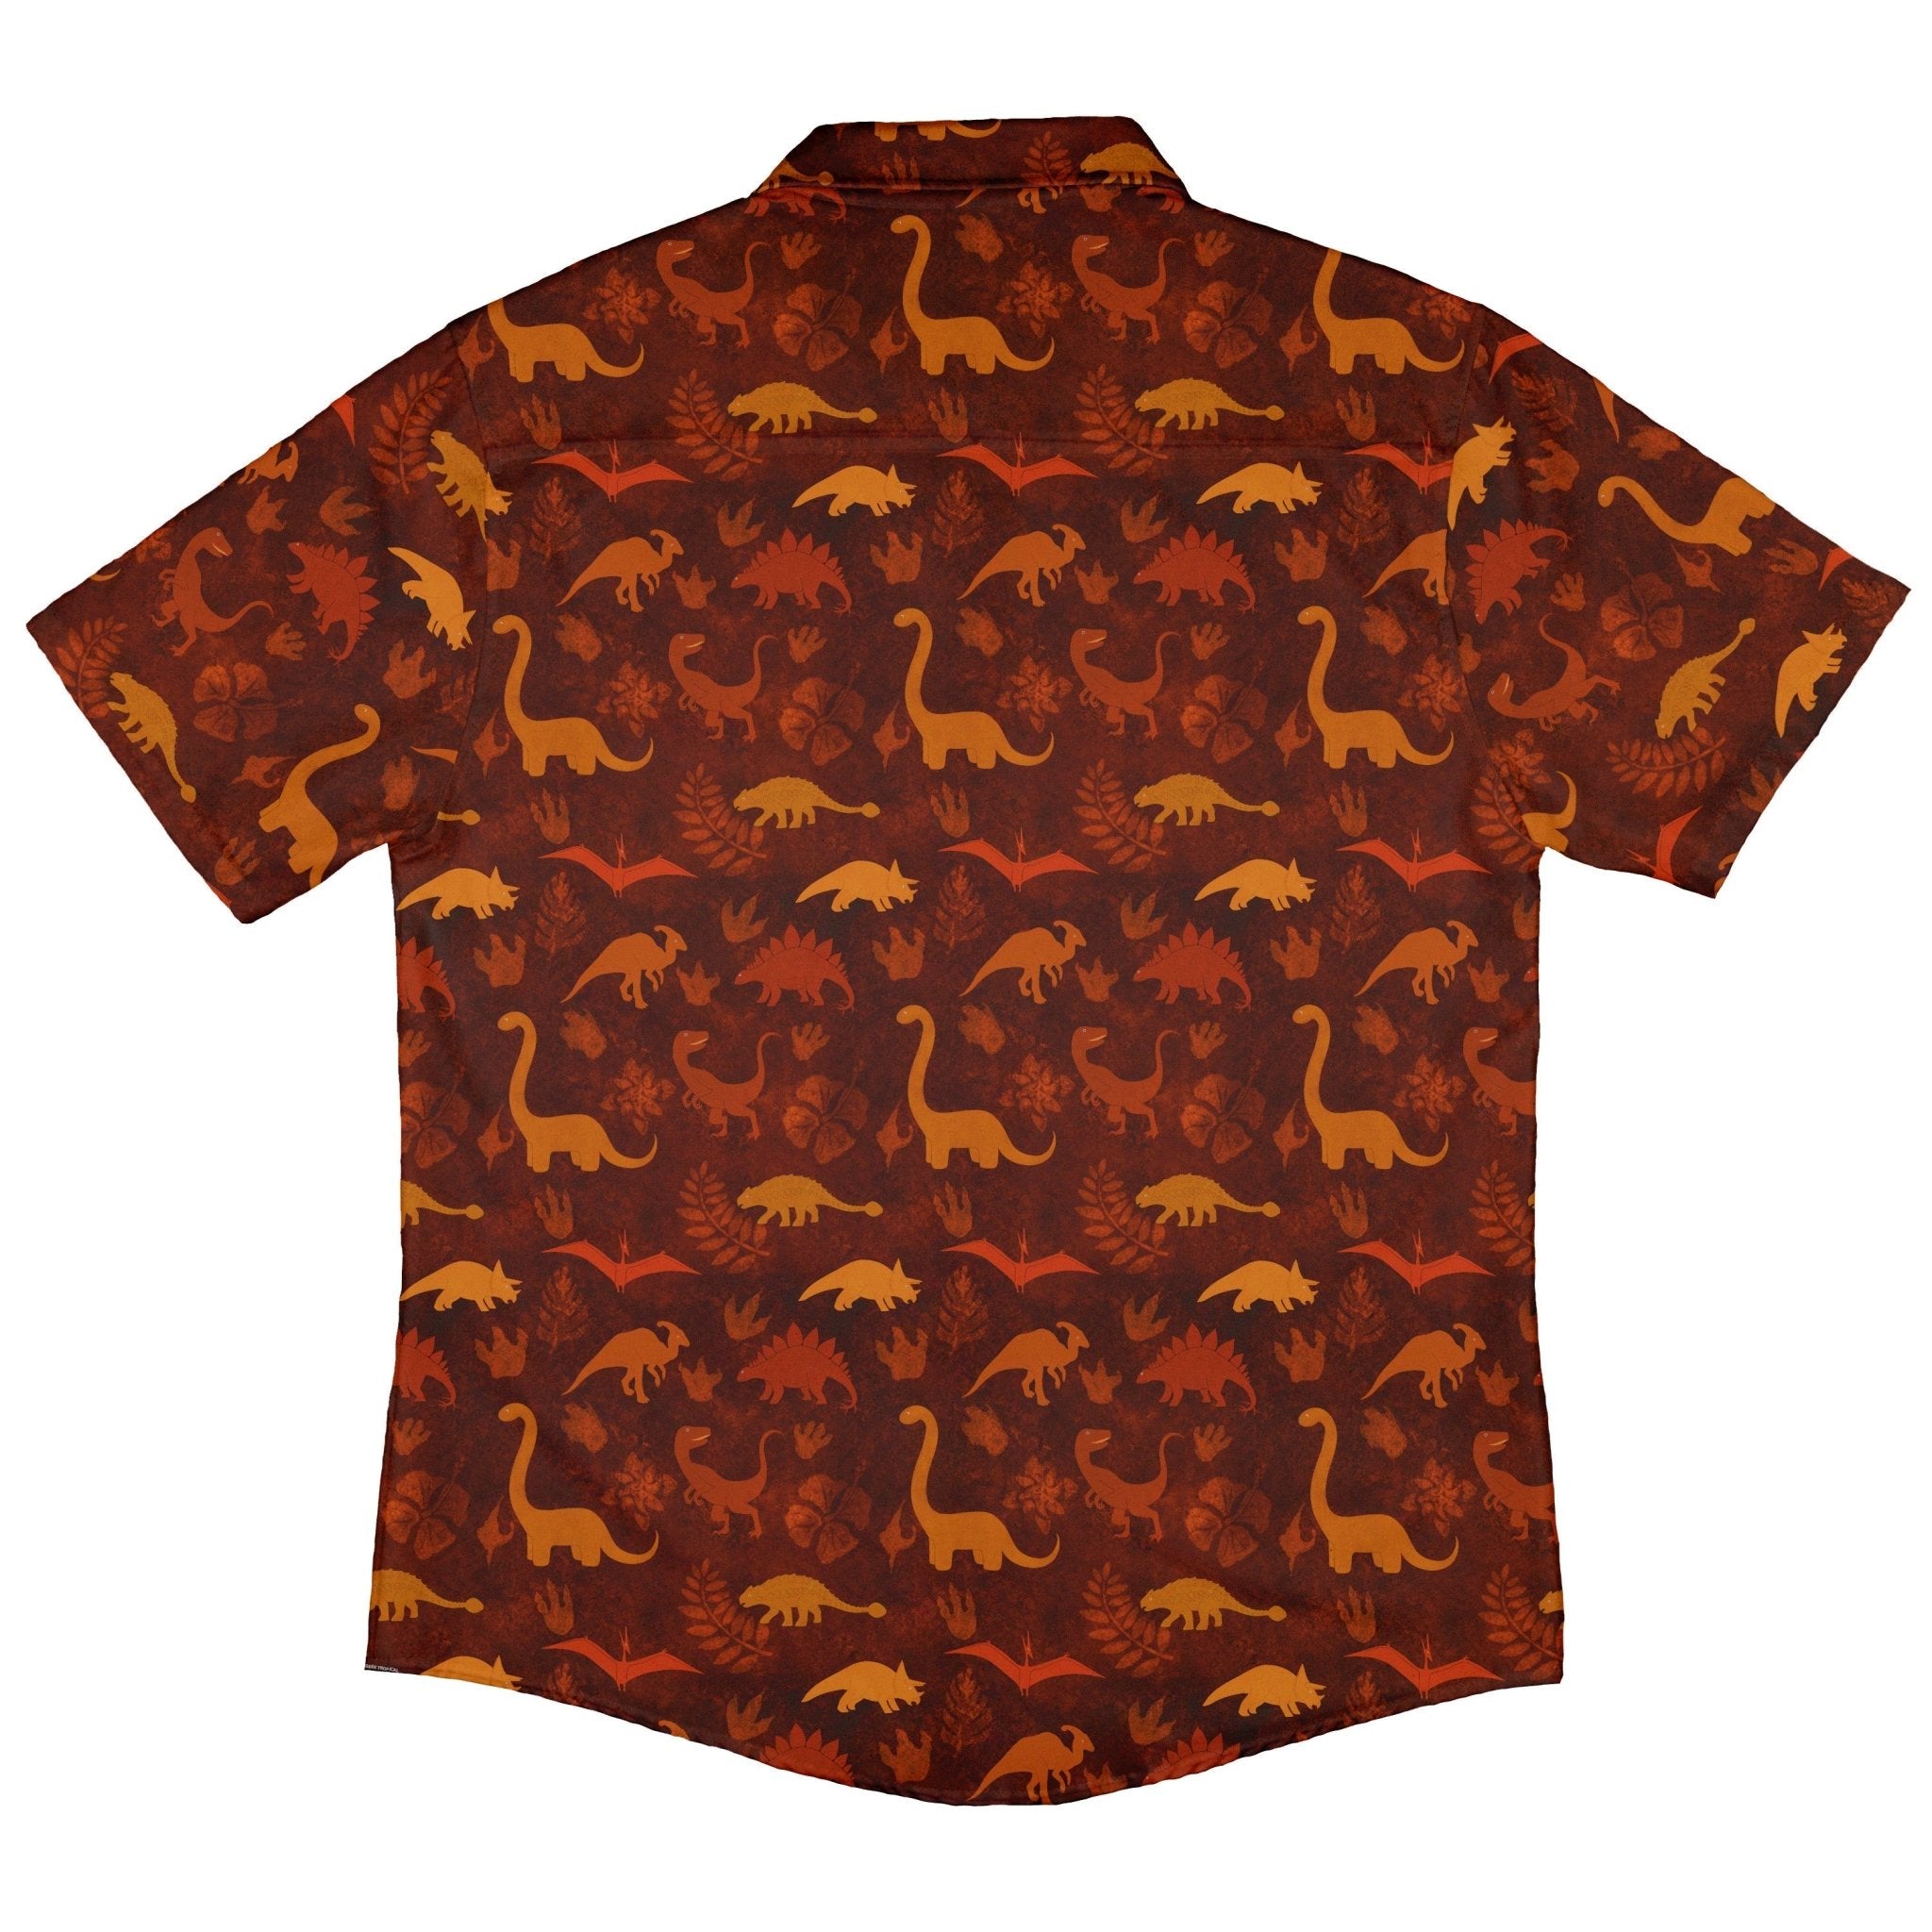 Dinosaur Tropical Fall Sunset Button Up Shirt - adult sizing - Animal Patterns - Designs by Nathan